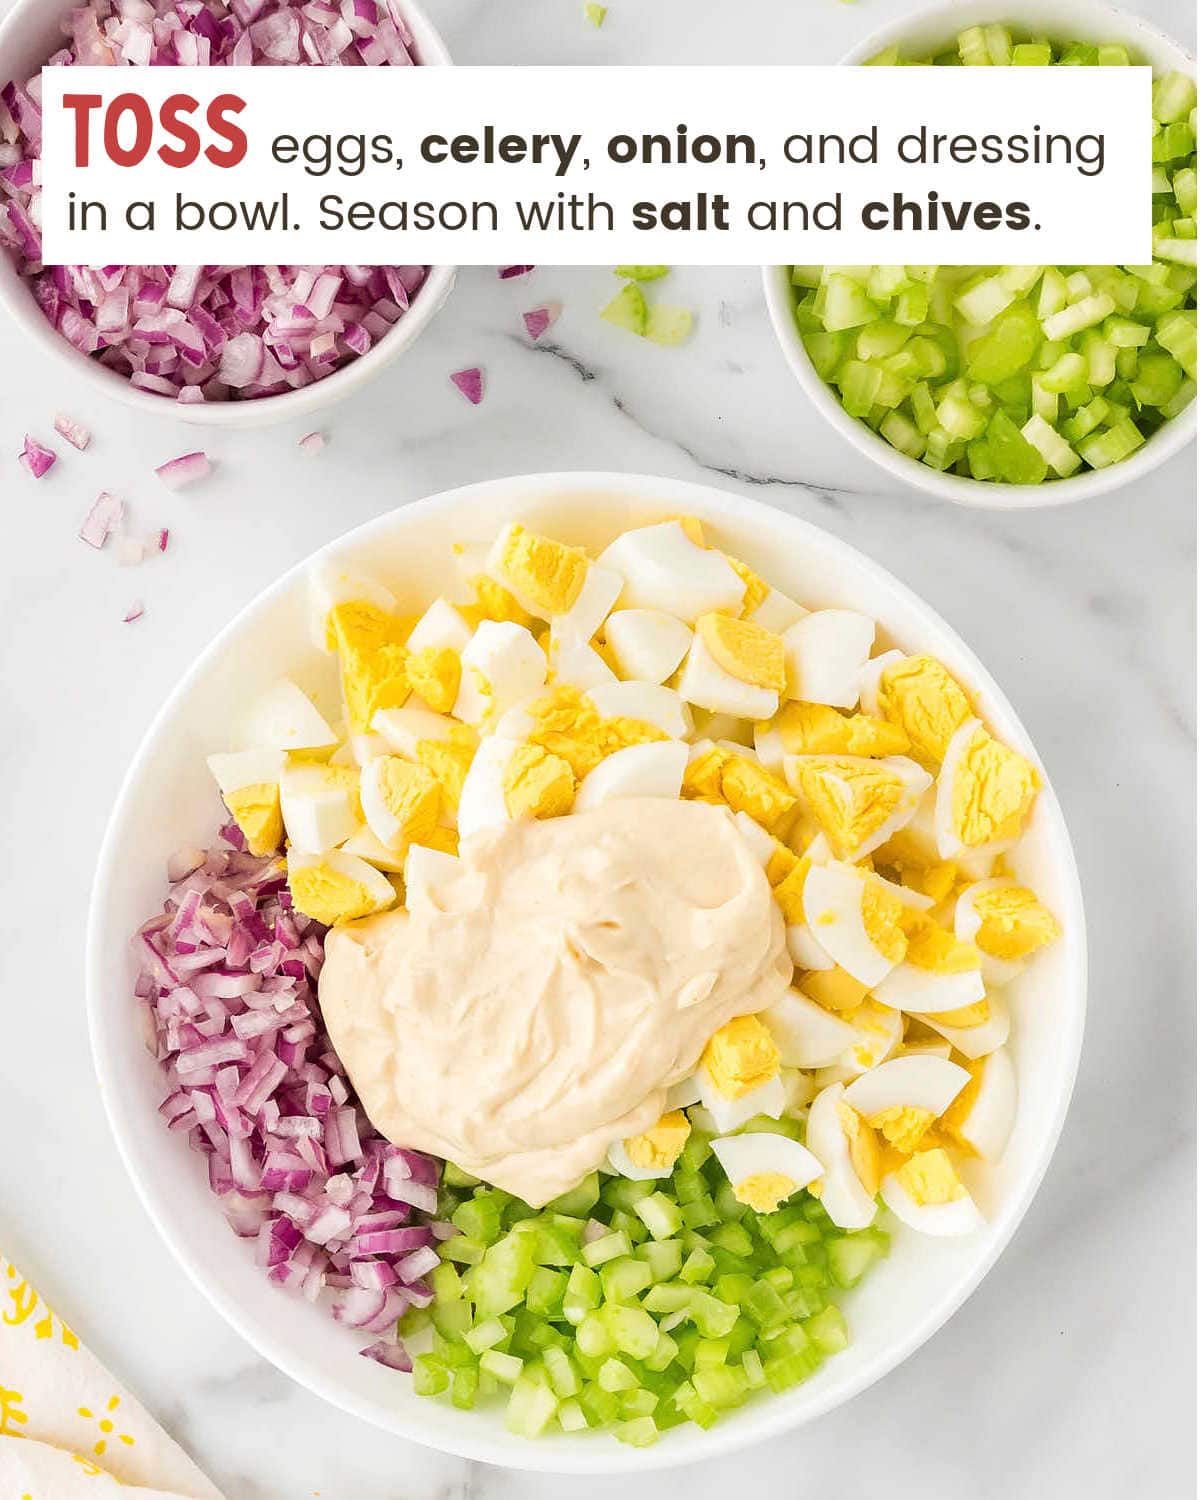 Mixing chopped ingredients in a bowl for Egg Salad.